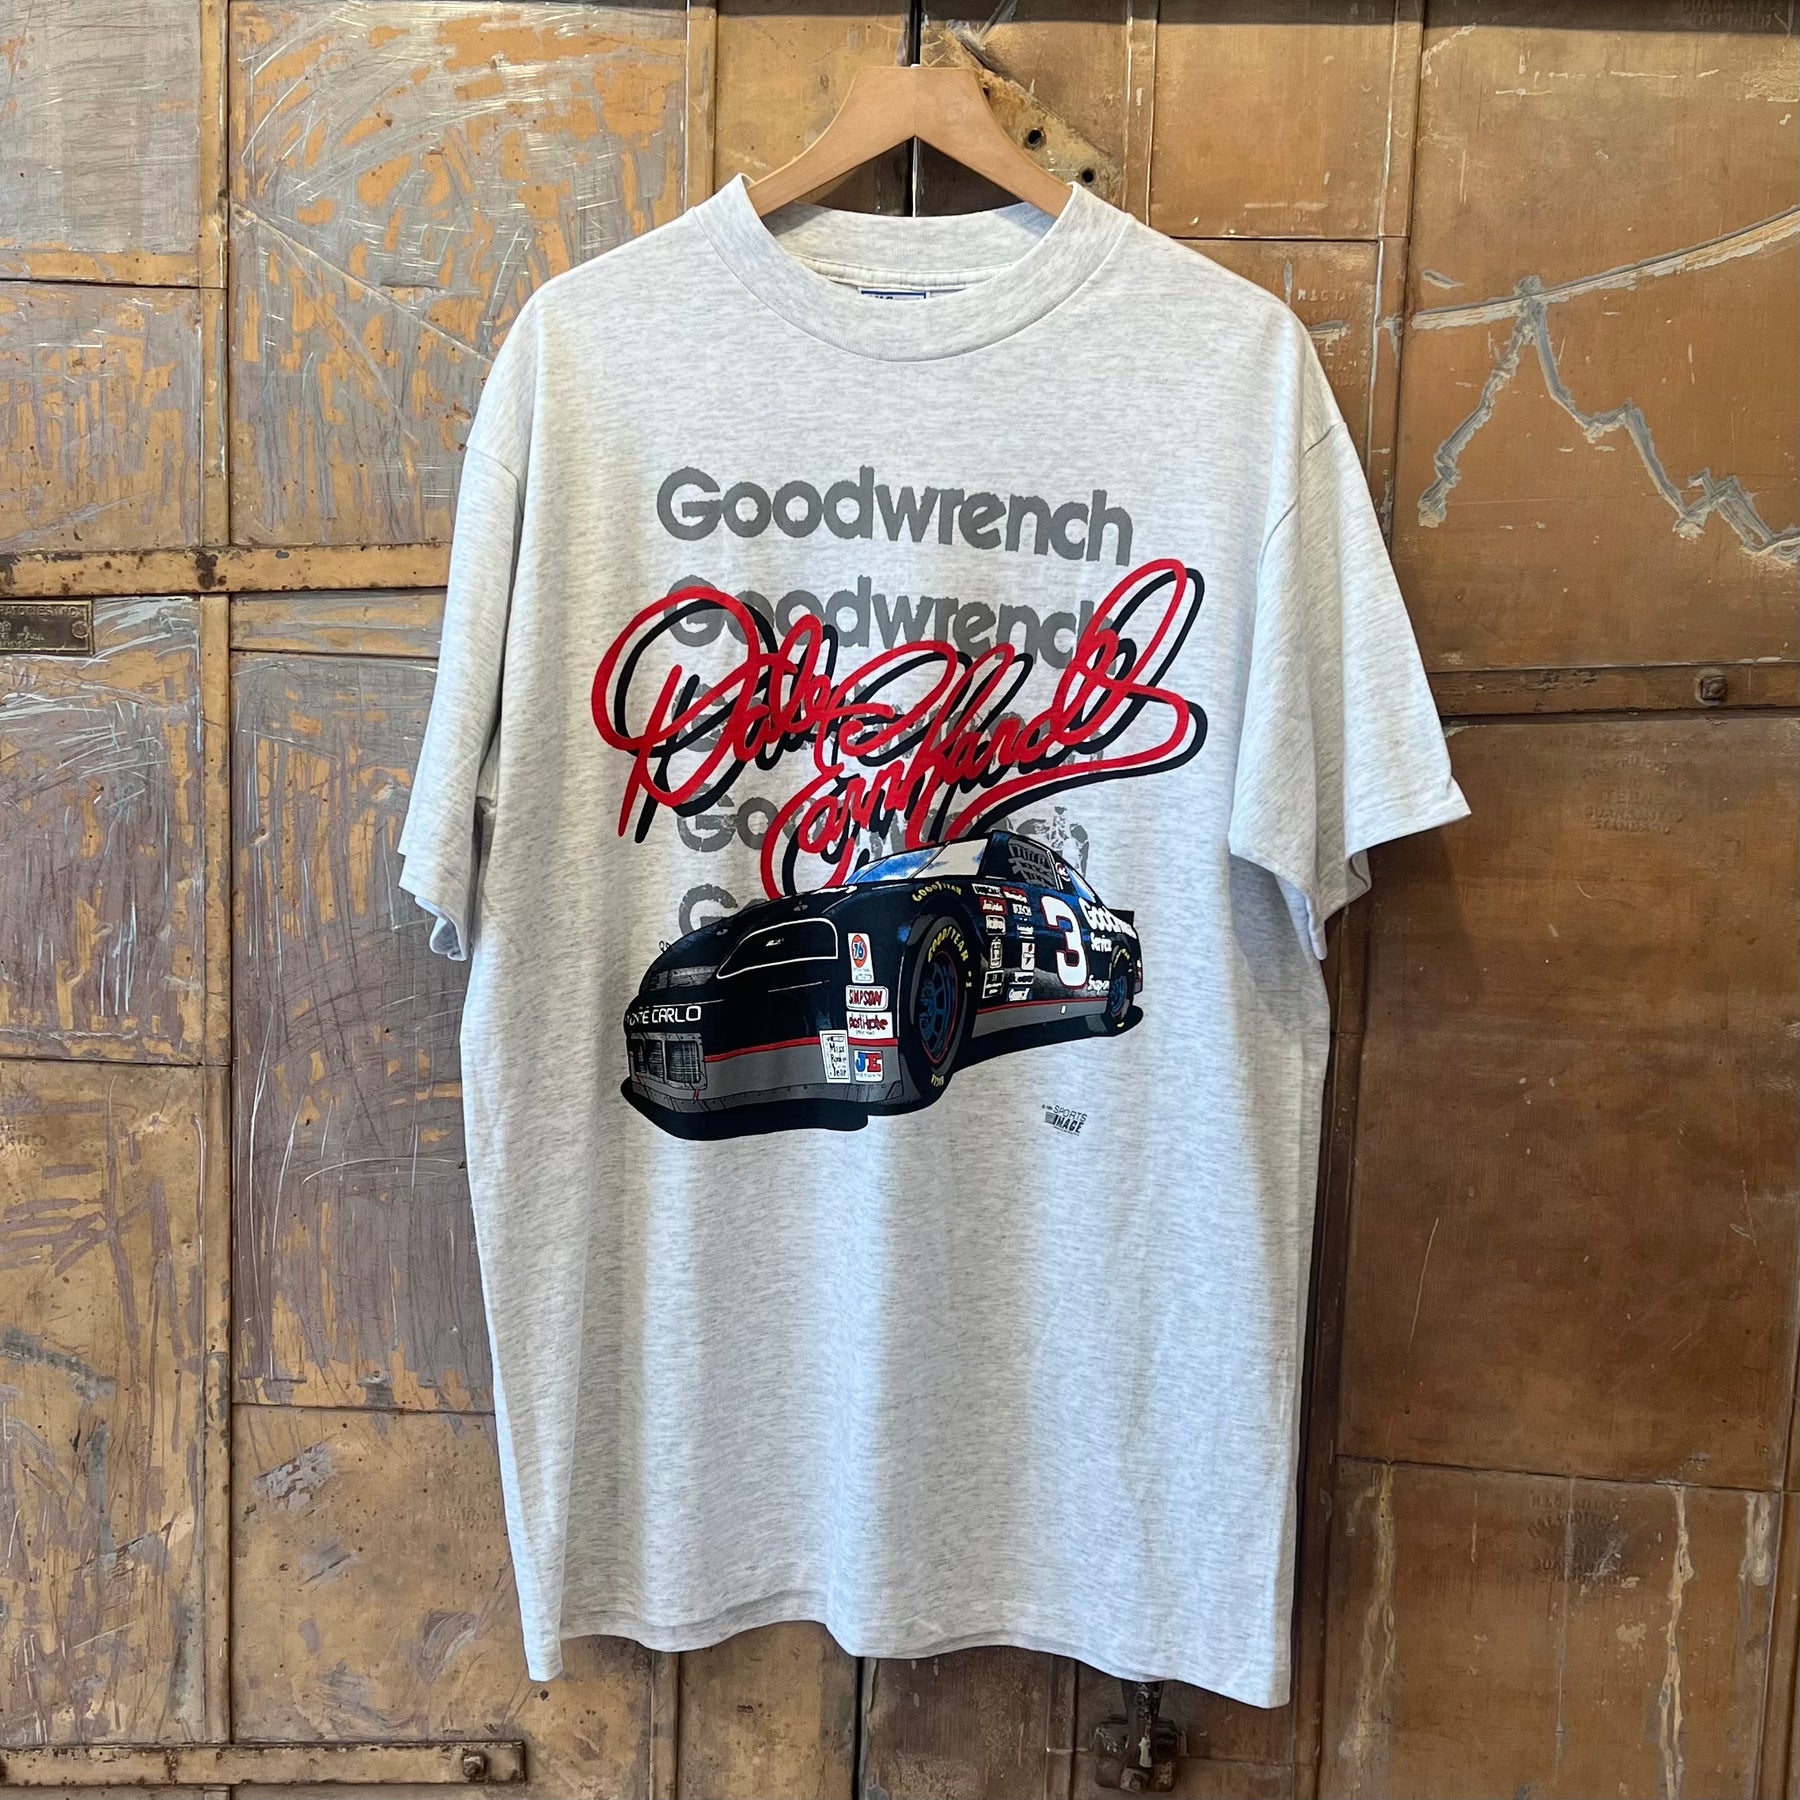 Goodwrench Grey Dale Racer Tee